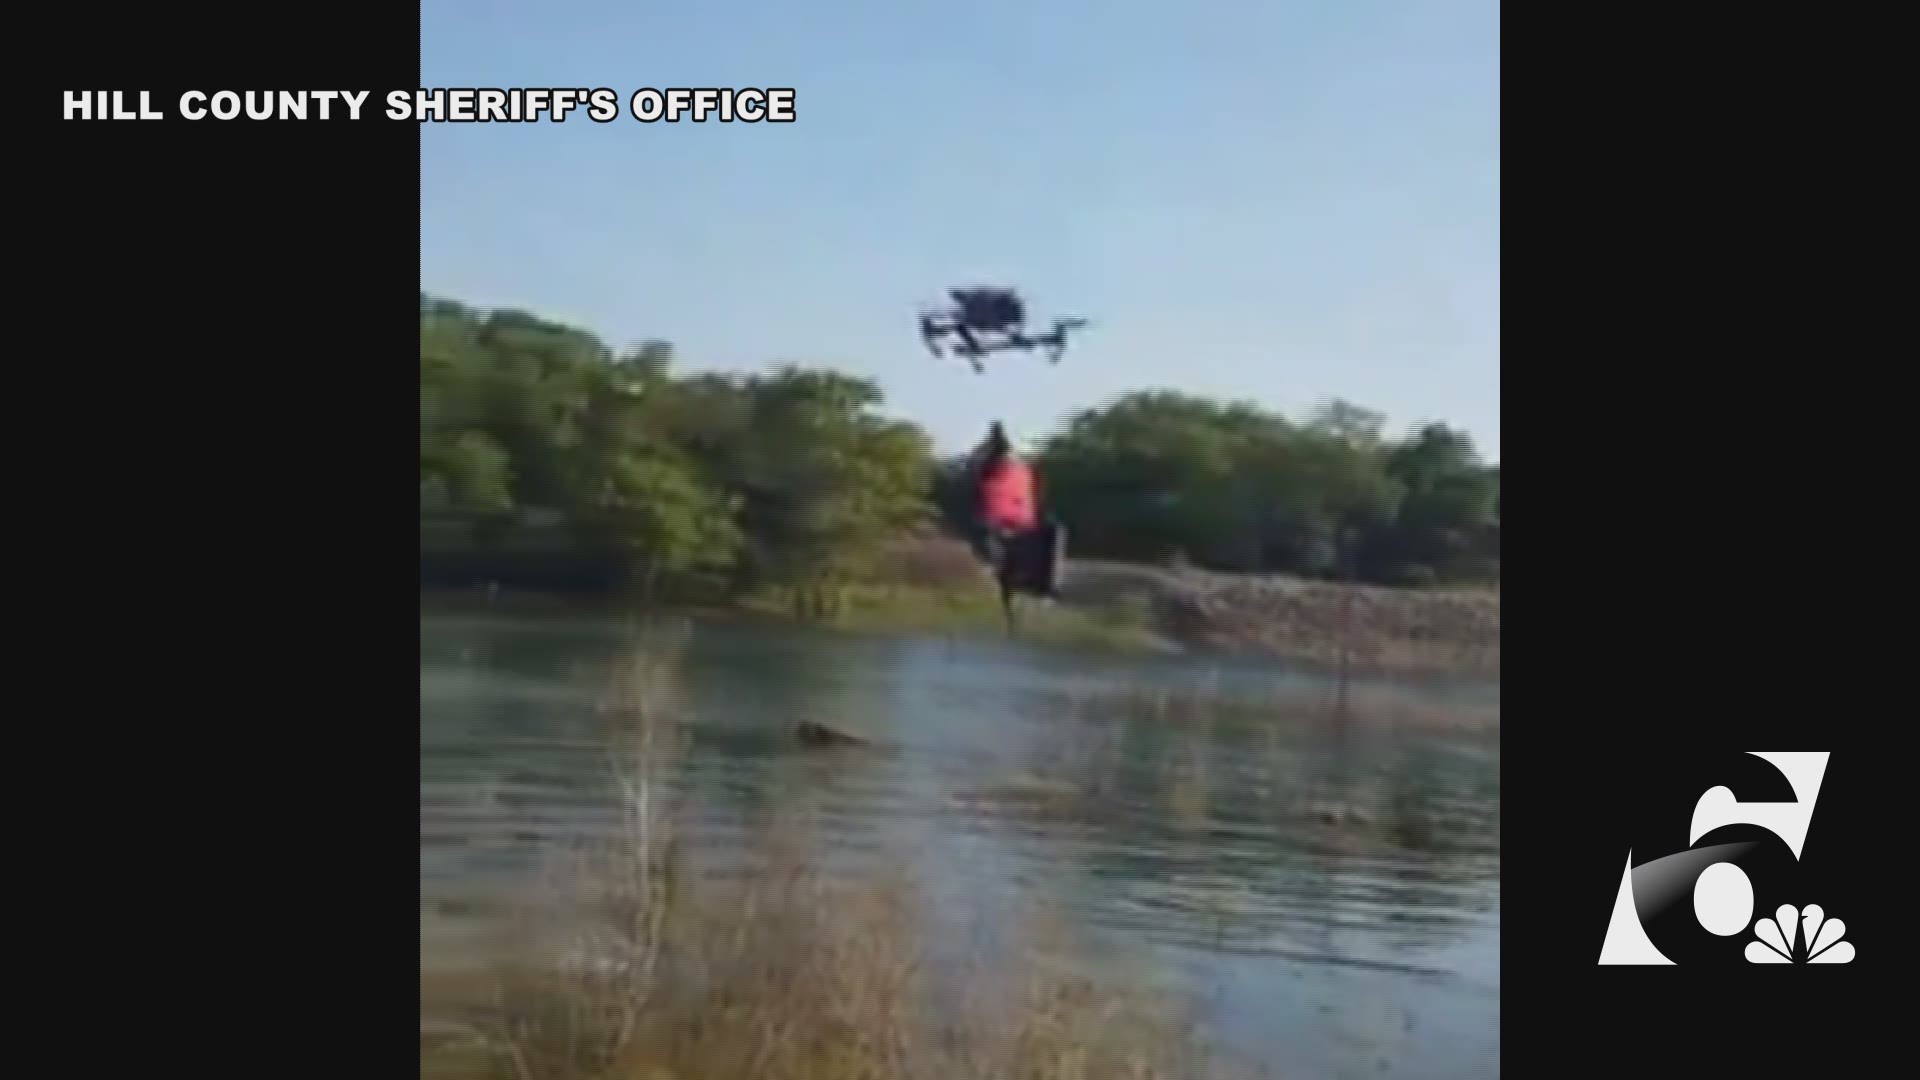 Hill County Emergency Management uses drone to rescue person stranded in Brazos River.